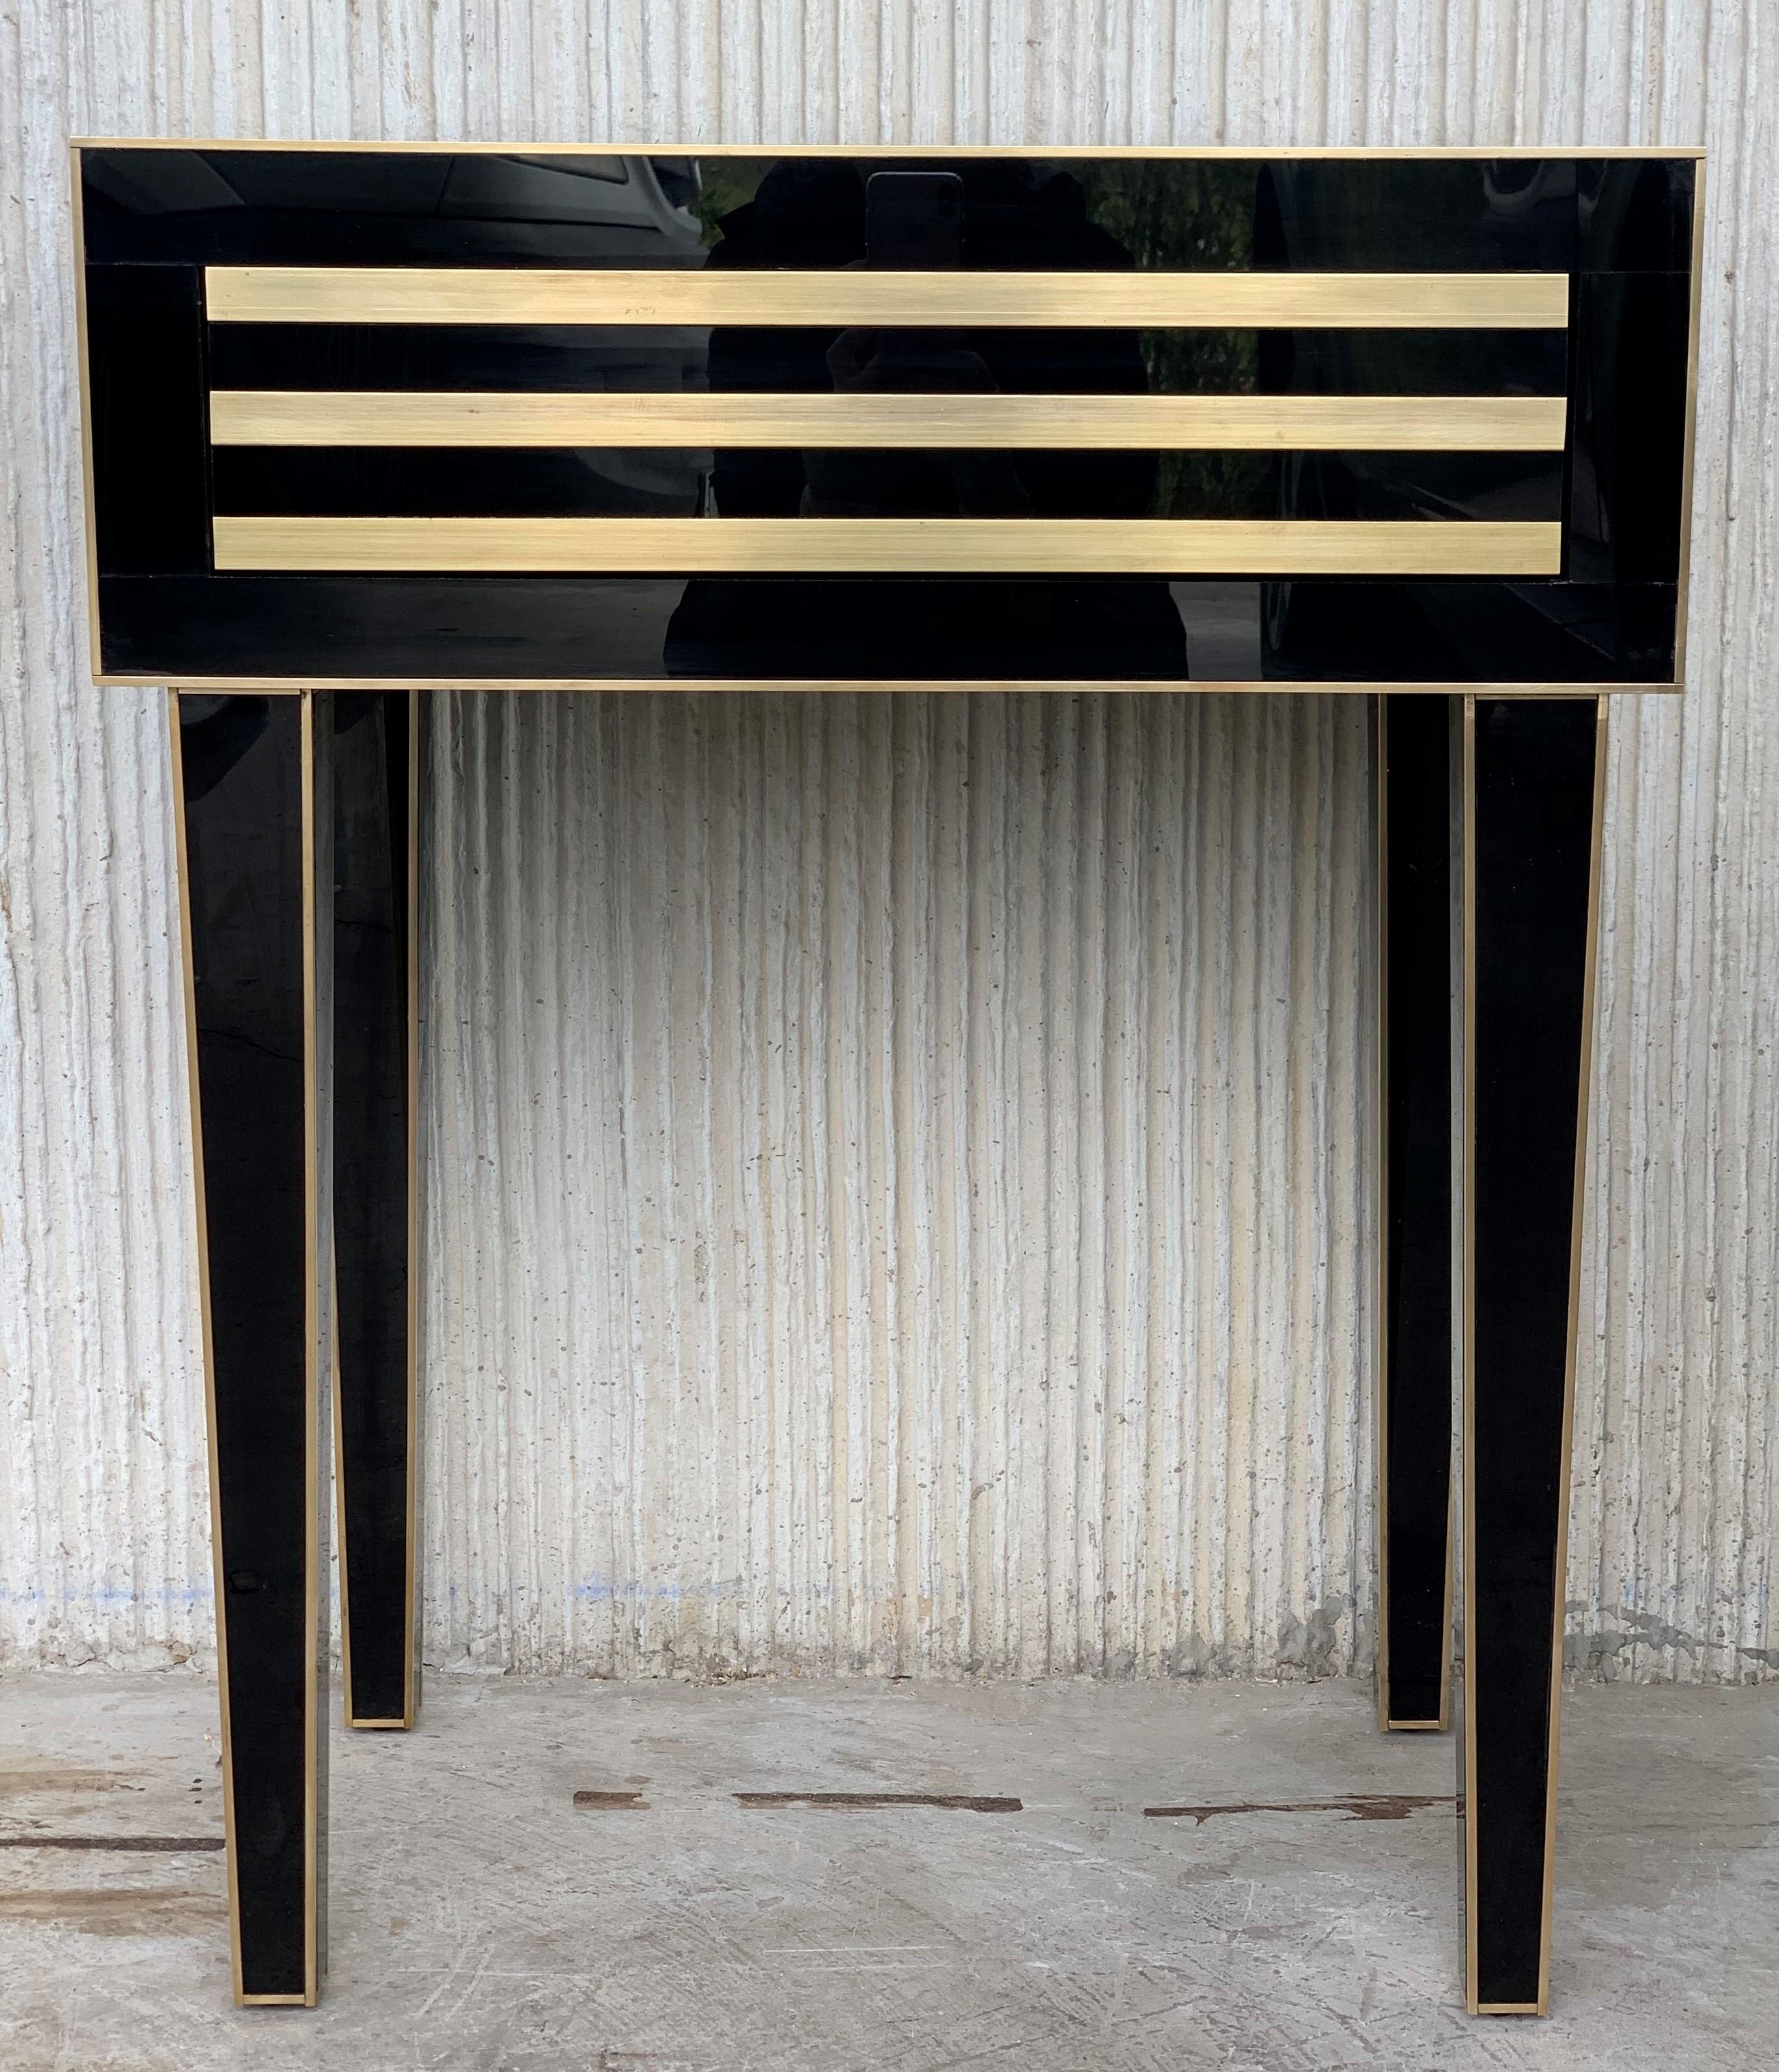 New pair of black glass and brass nightstands with one-drawer in black and white, mirrored details in drawers.
Soft push system opening with brake in drawers.
Two glass and brass handles


We can make it in custom size or custom color upon